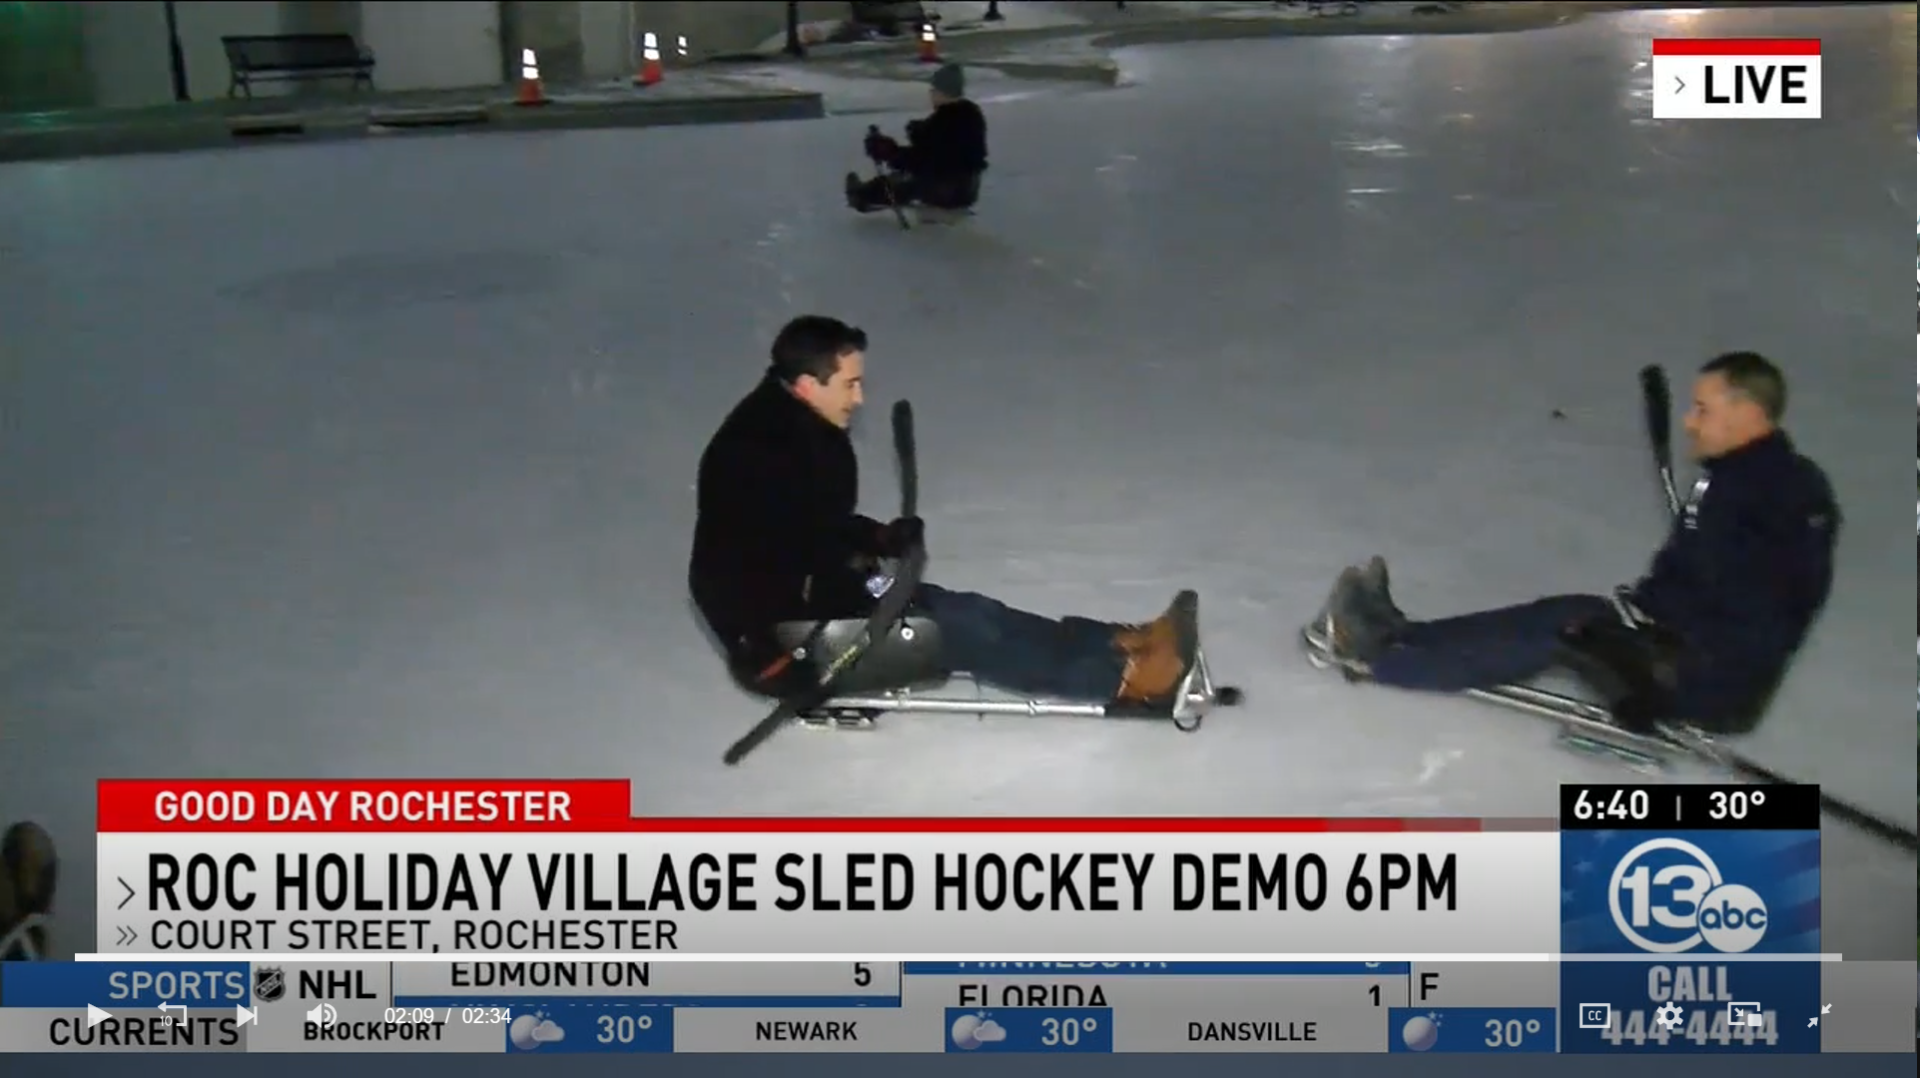 A screenshot of a TV news screen with "ROC Holiday Village Sled Hockey Demo"; two people on hockey sleds with sticks are moving towards a puck on an outdoor ice rink